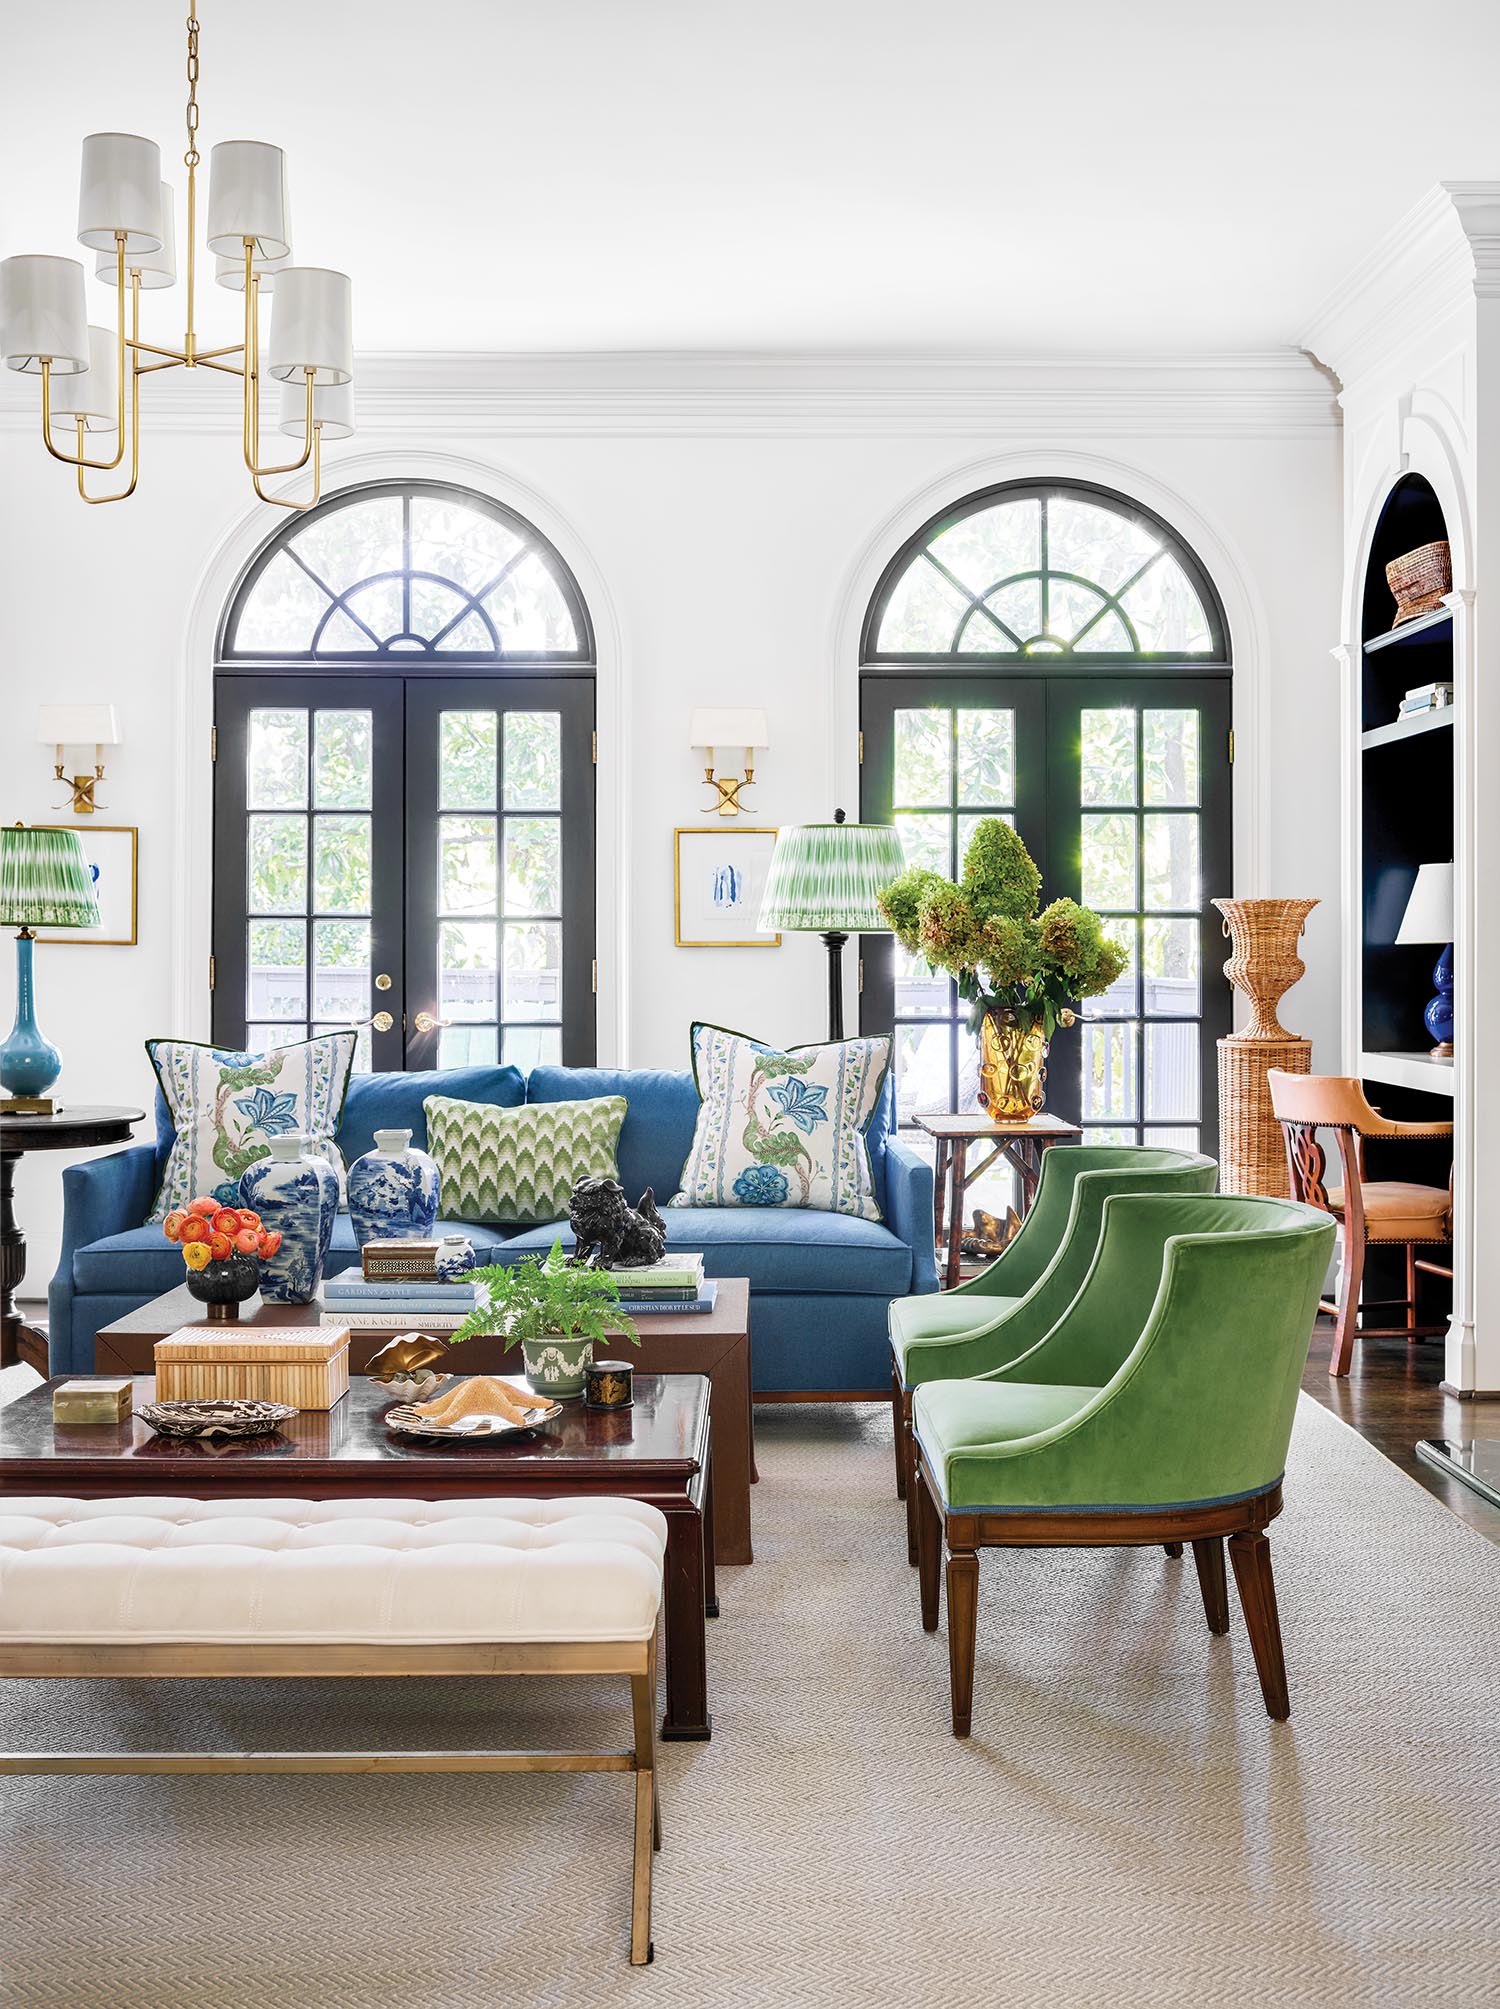 Bright blue and green furniture fill a high ceilinged white room.